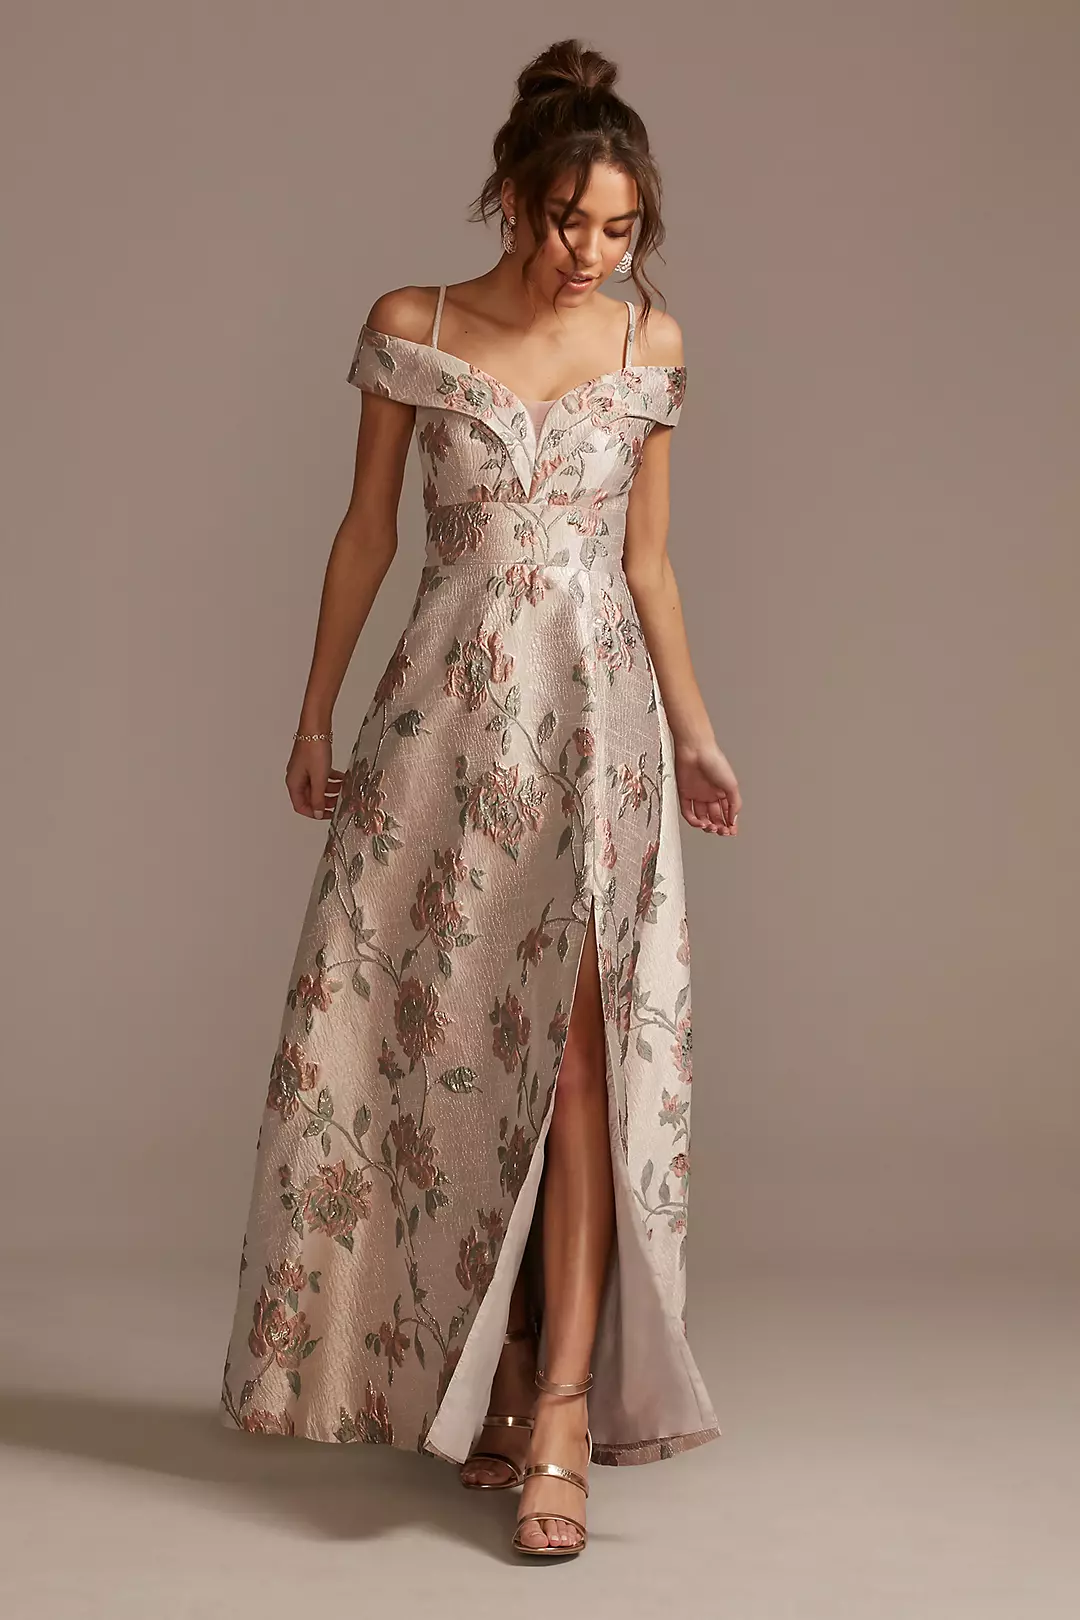 Brocade Off the Shoulder Ball Gown with Slit Image